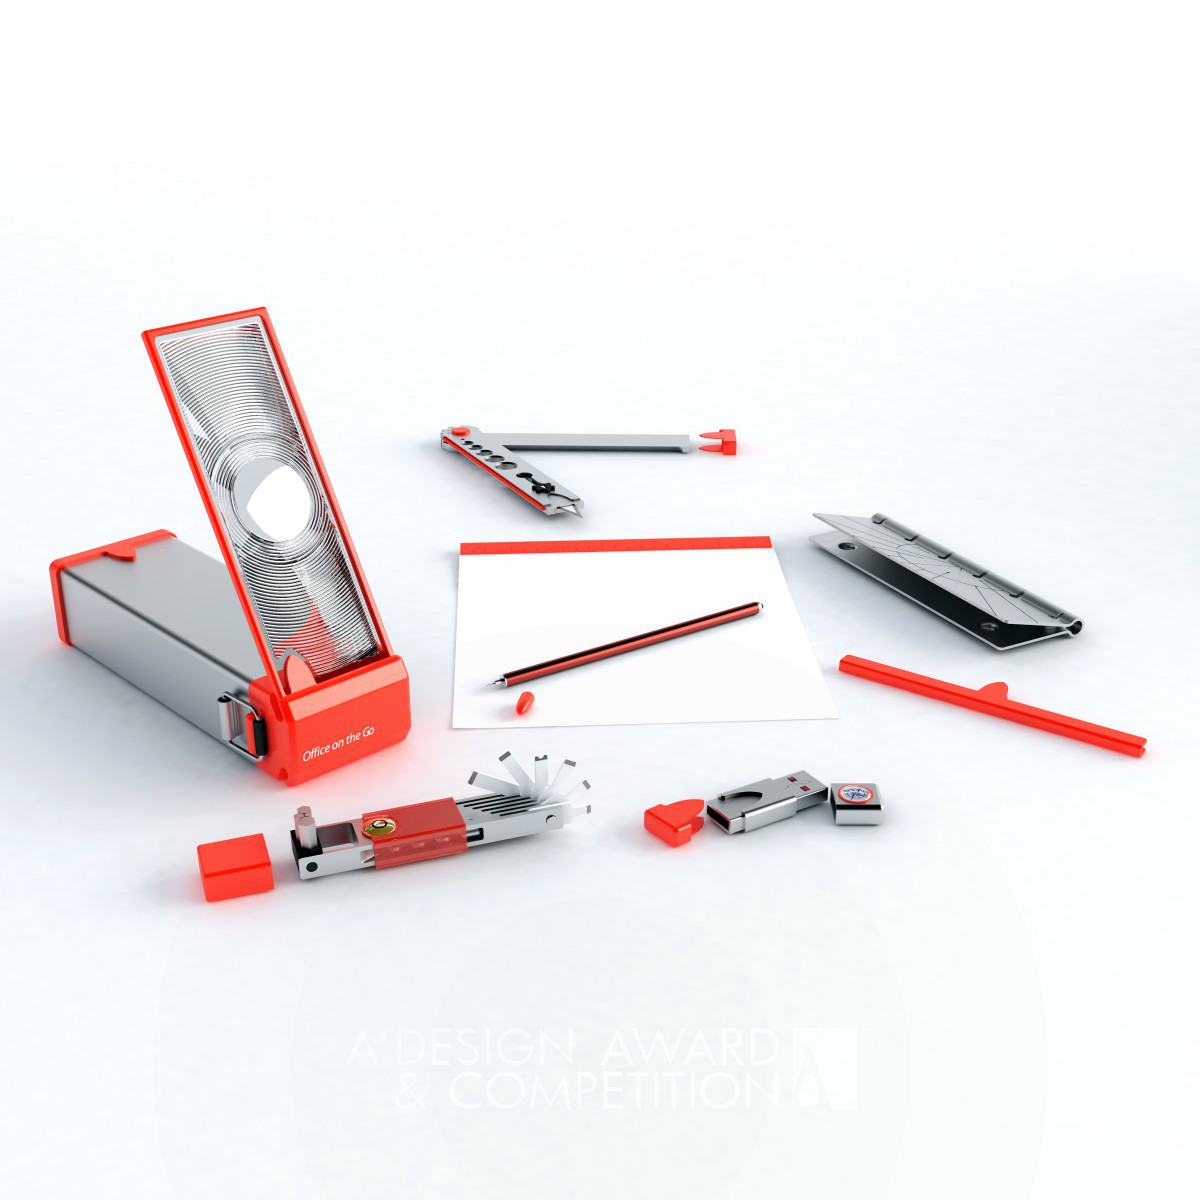 Office on the Go Stationary Kit by Hakan Gürsu